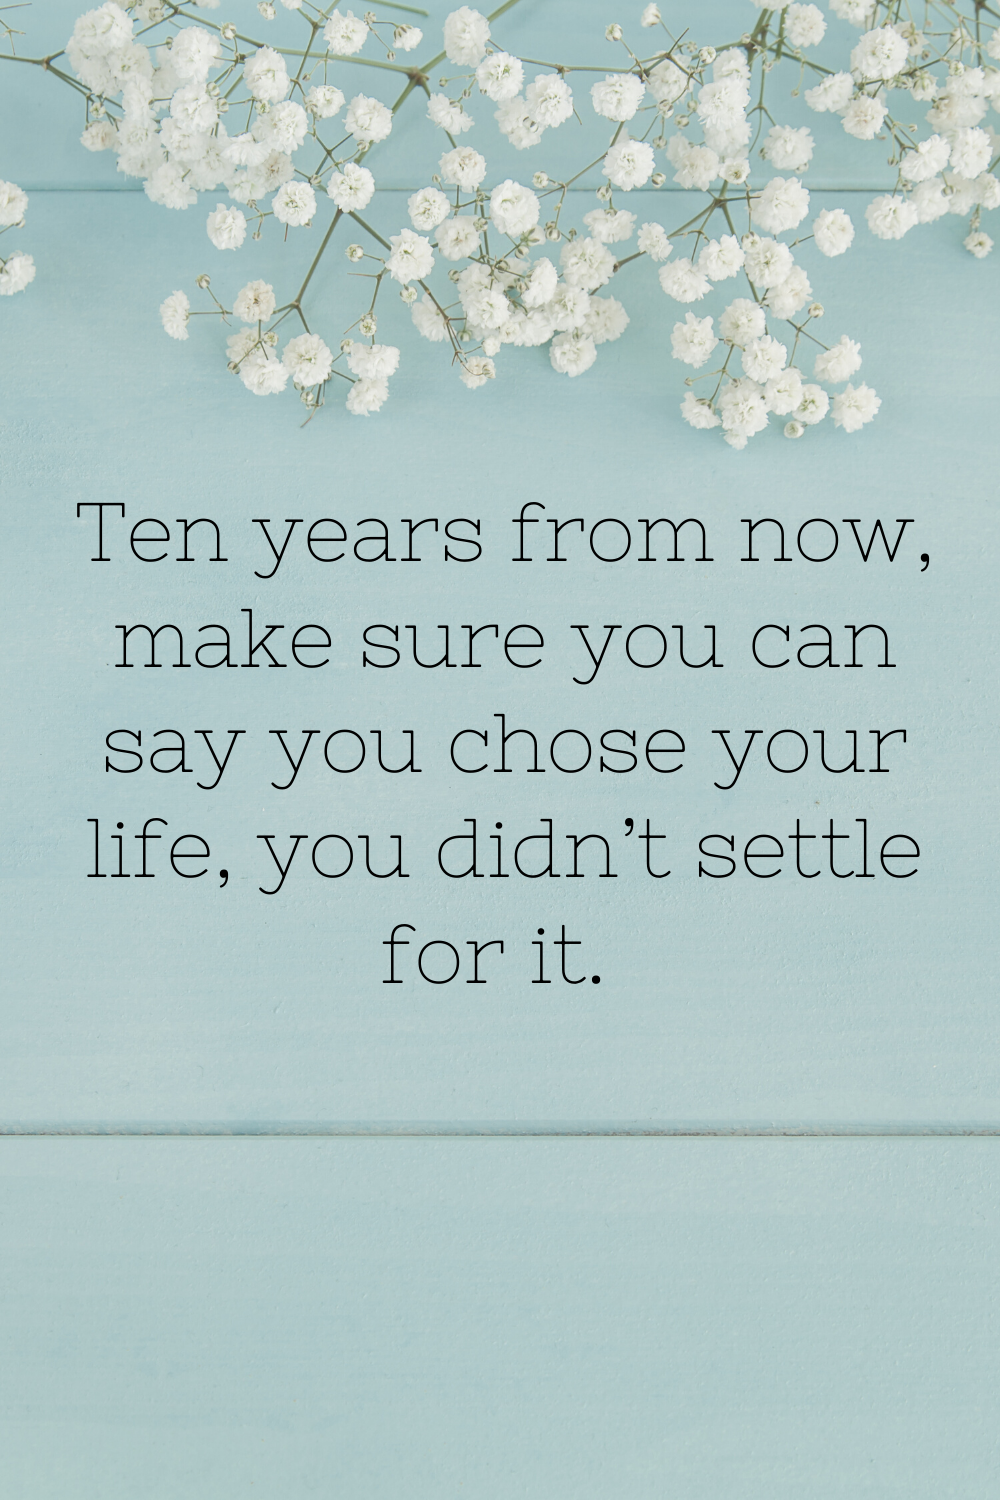 ten years from now make sure you can say you chose your life, you didn't settle for it